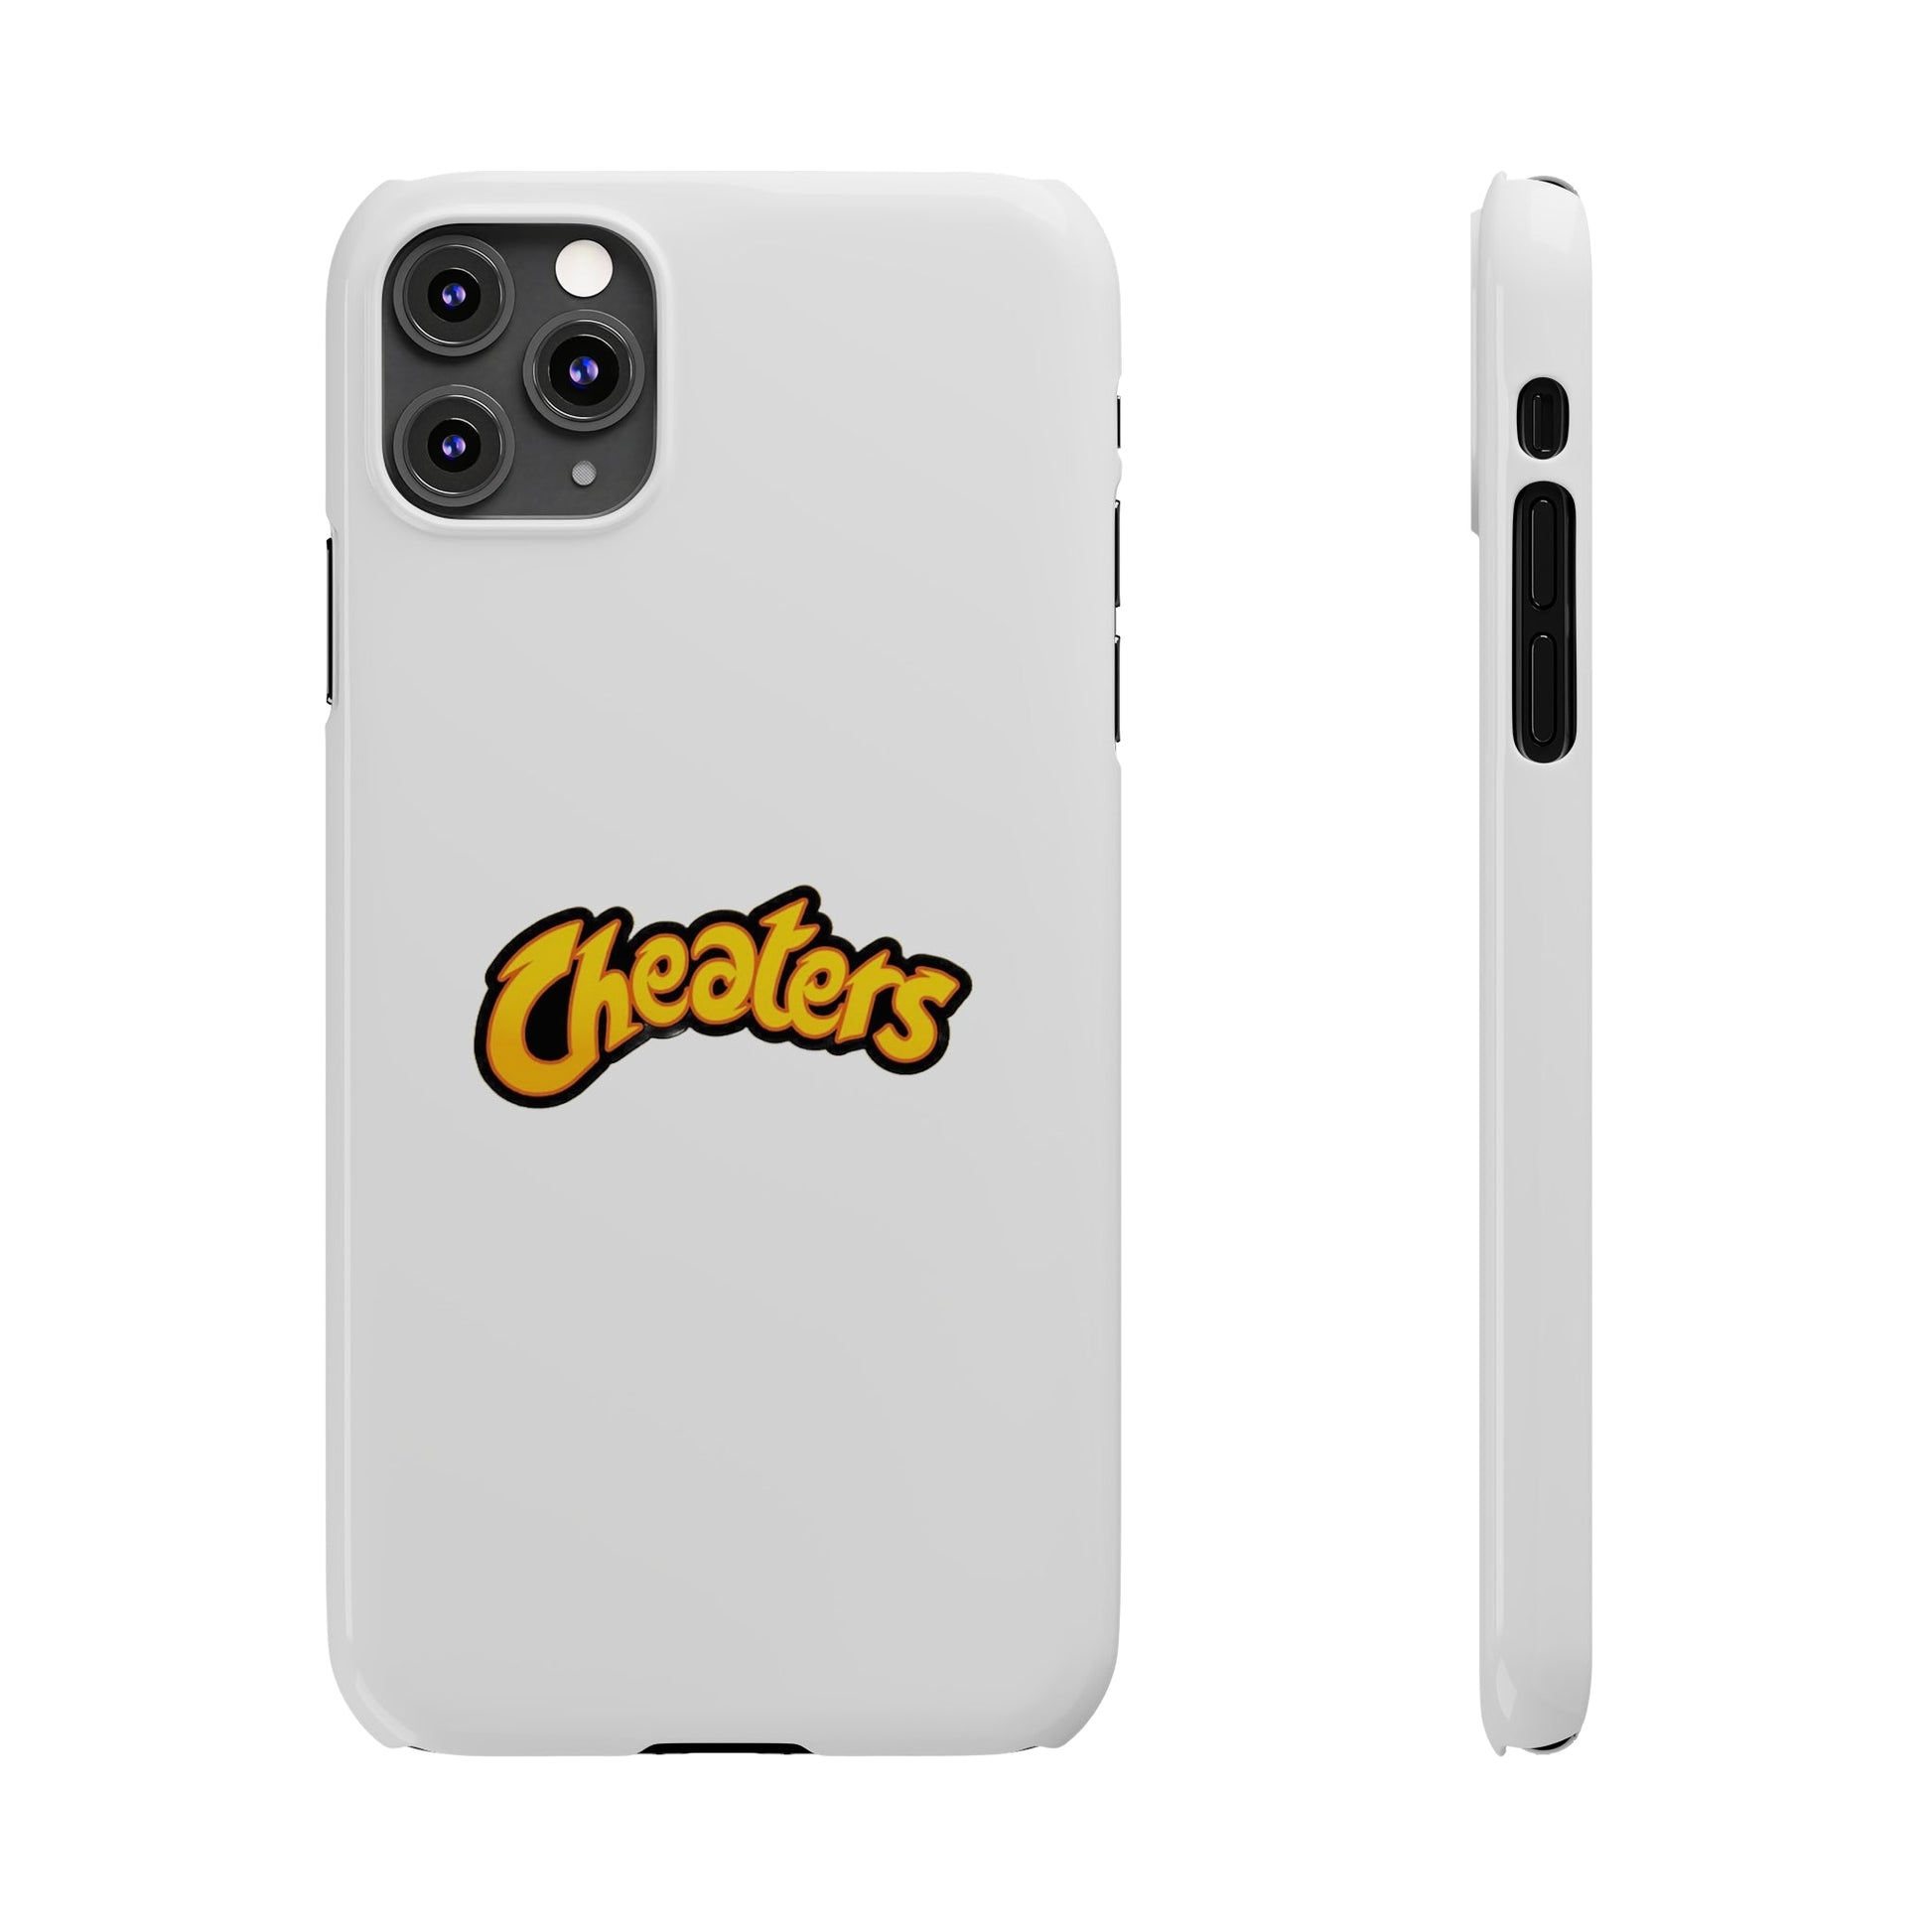 "Cheaters" MagStrong Phone Cases iPhone 11 Pro Max